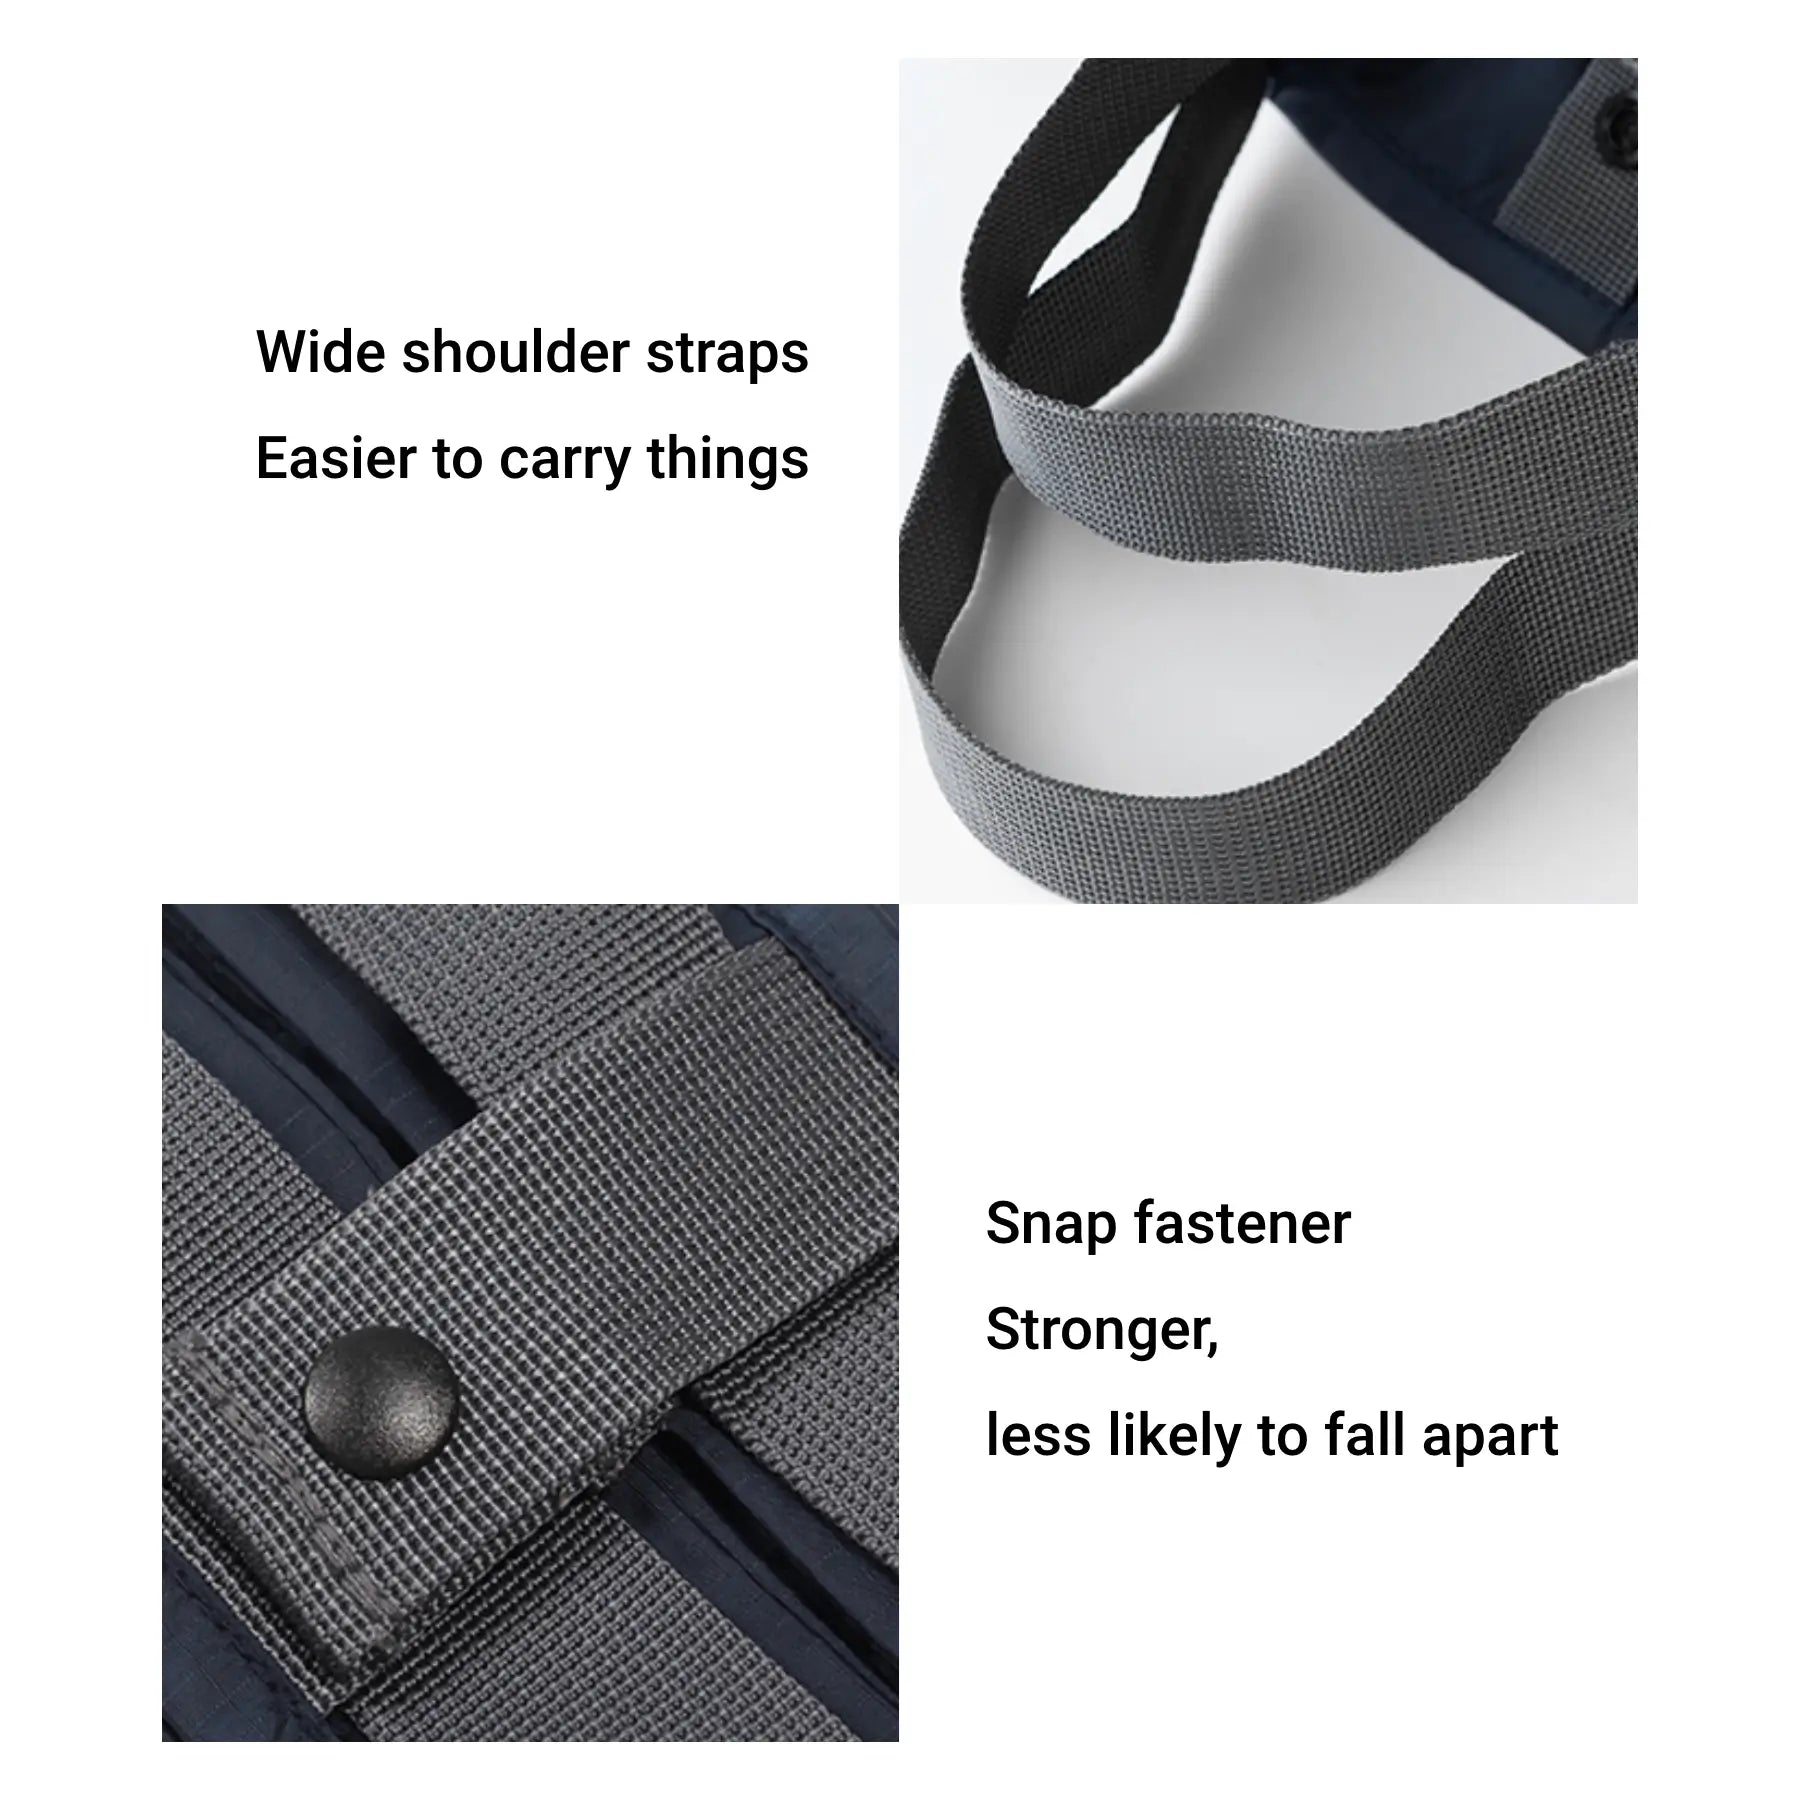 Long-lasting - Holds up to 15 kg (33 lb) - Strong material that doesn’t break away